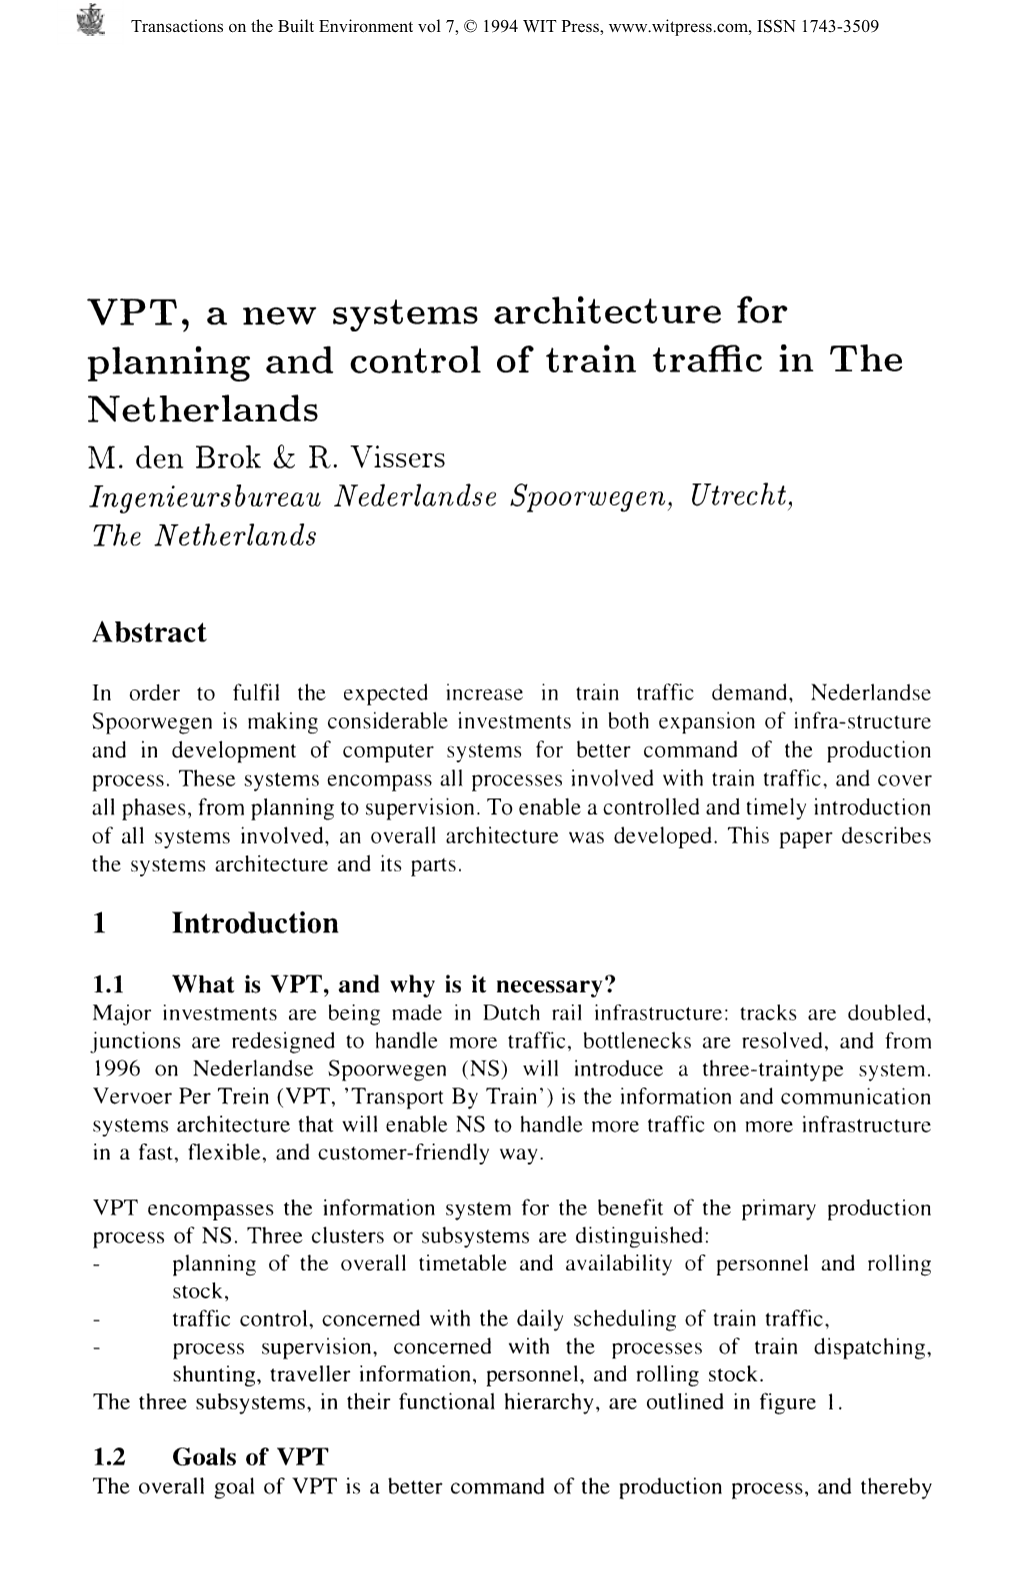 VPT, a New Systems Architecture for Planning and Control of Train Traffic in The